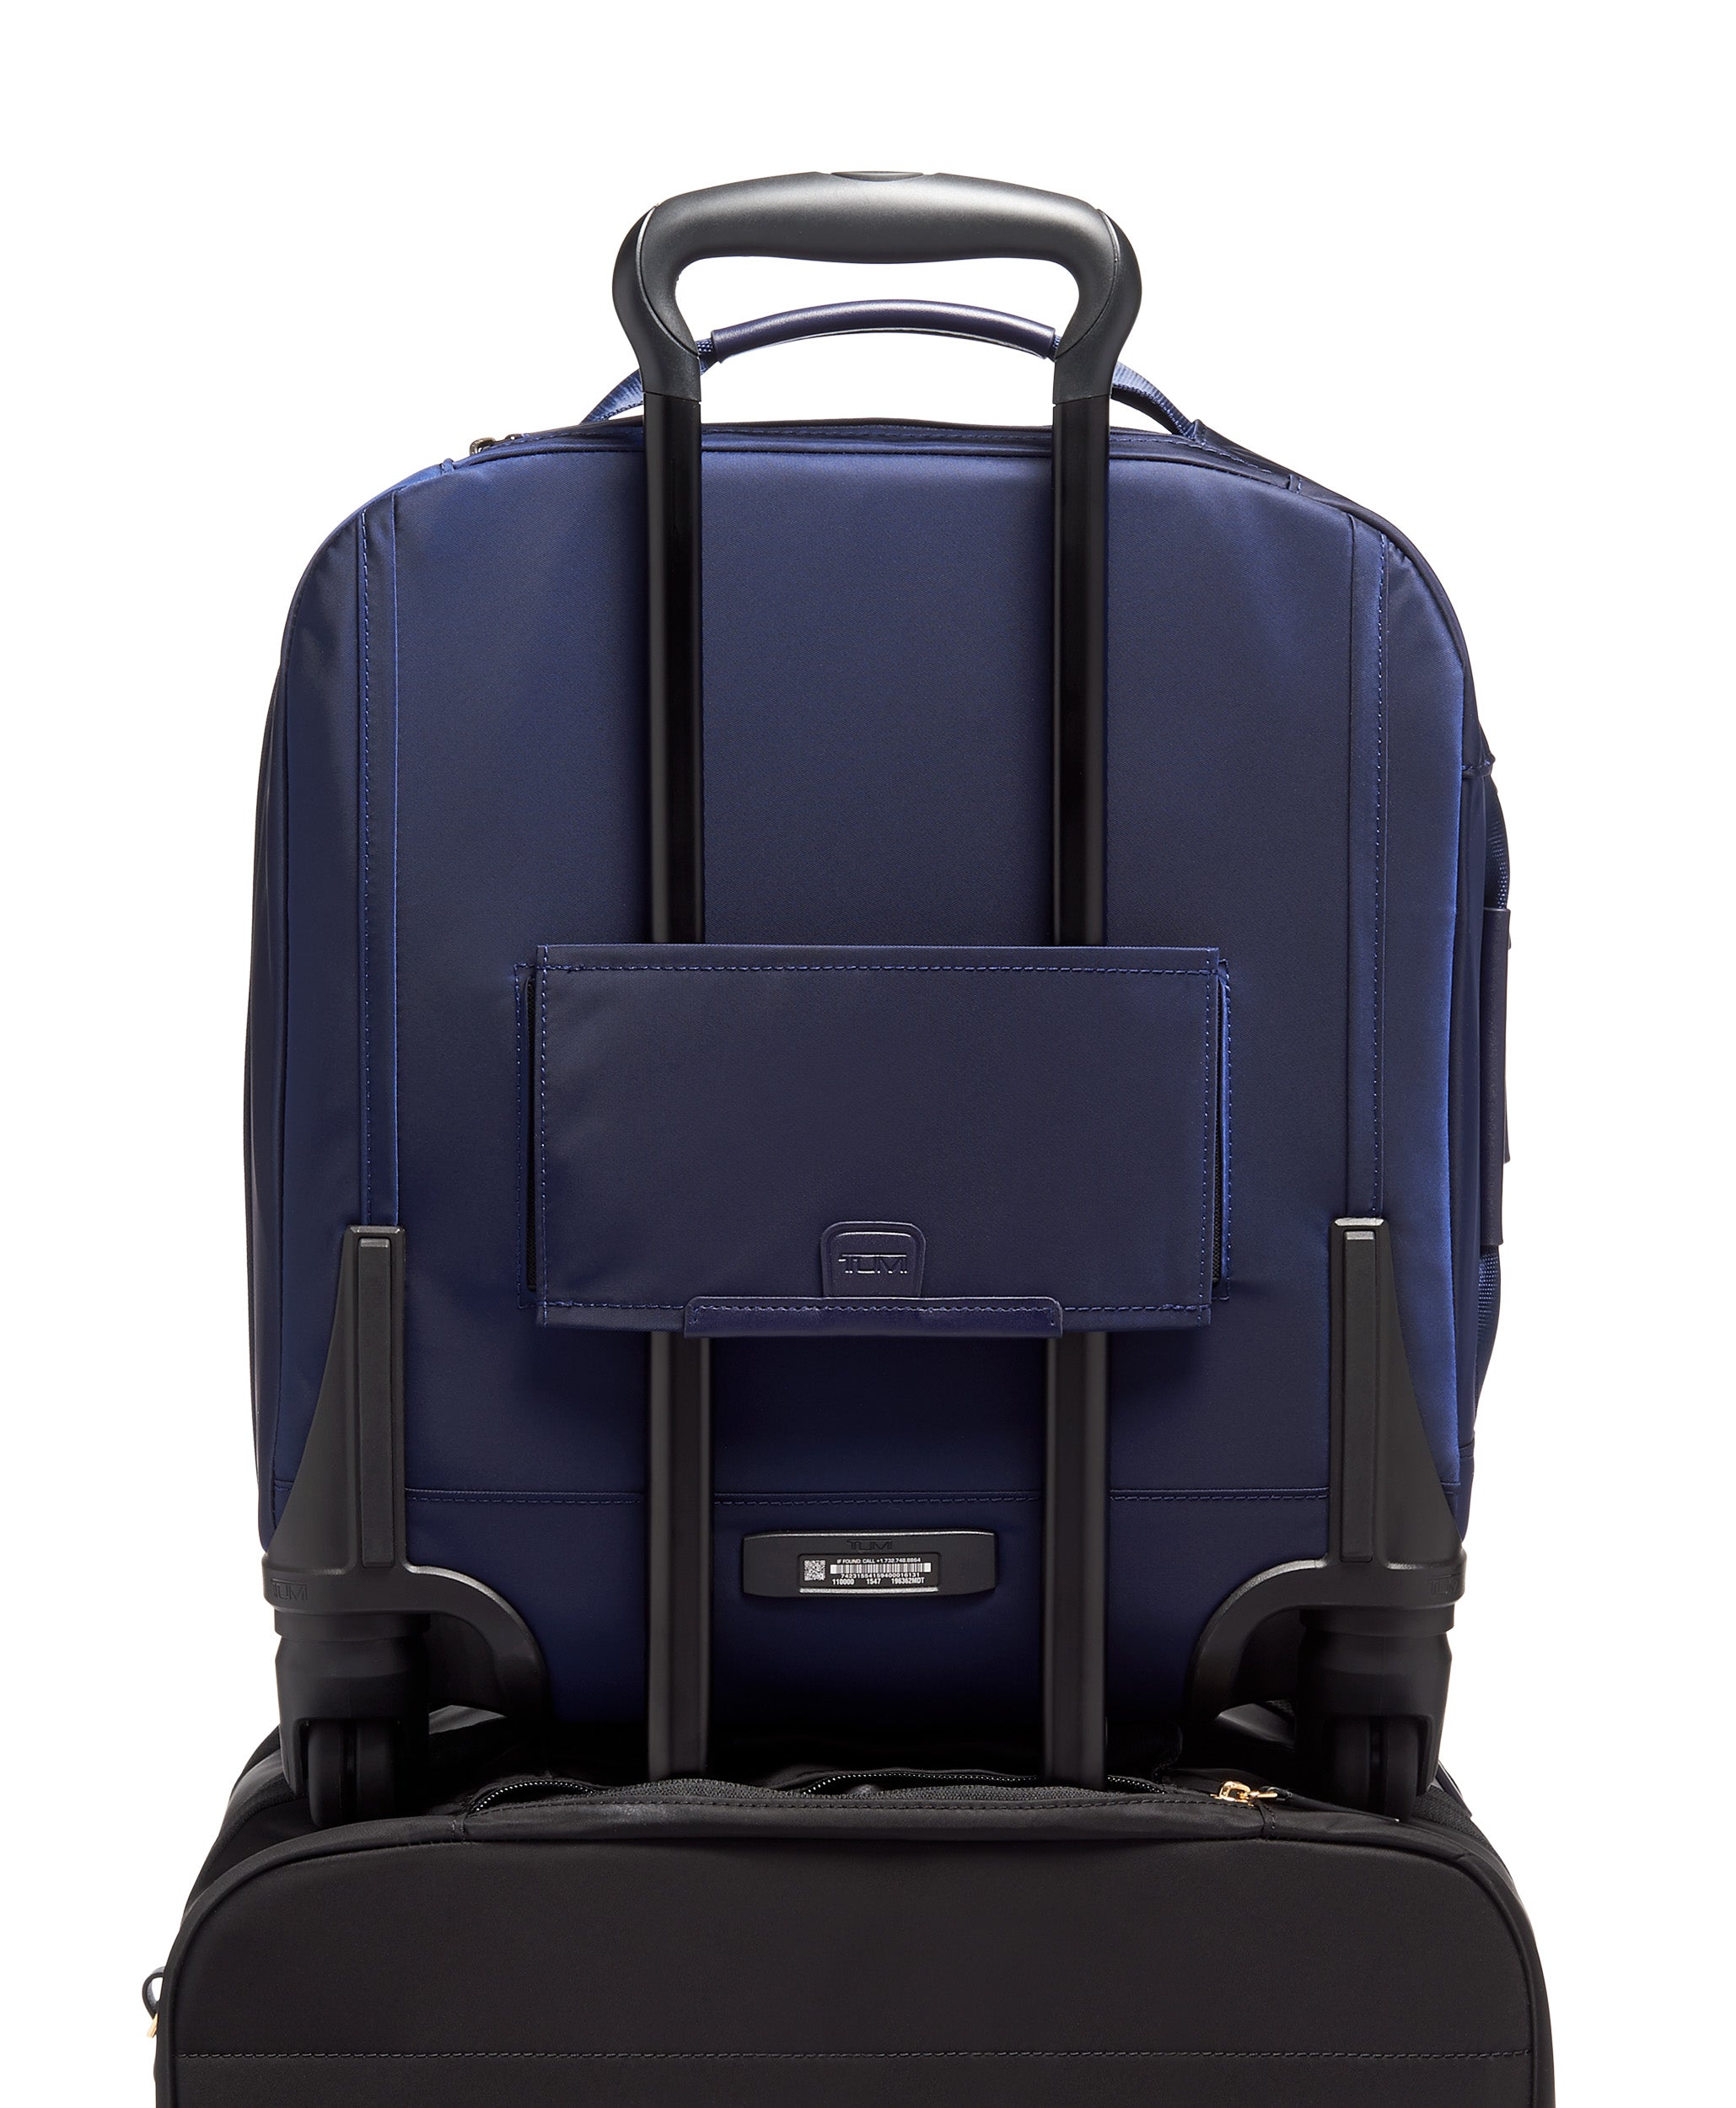 TUMI Voyageur Osona Compact Carry-On – Luggage Online